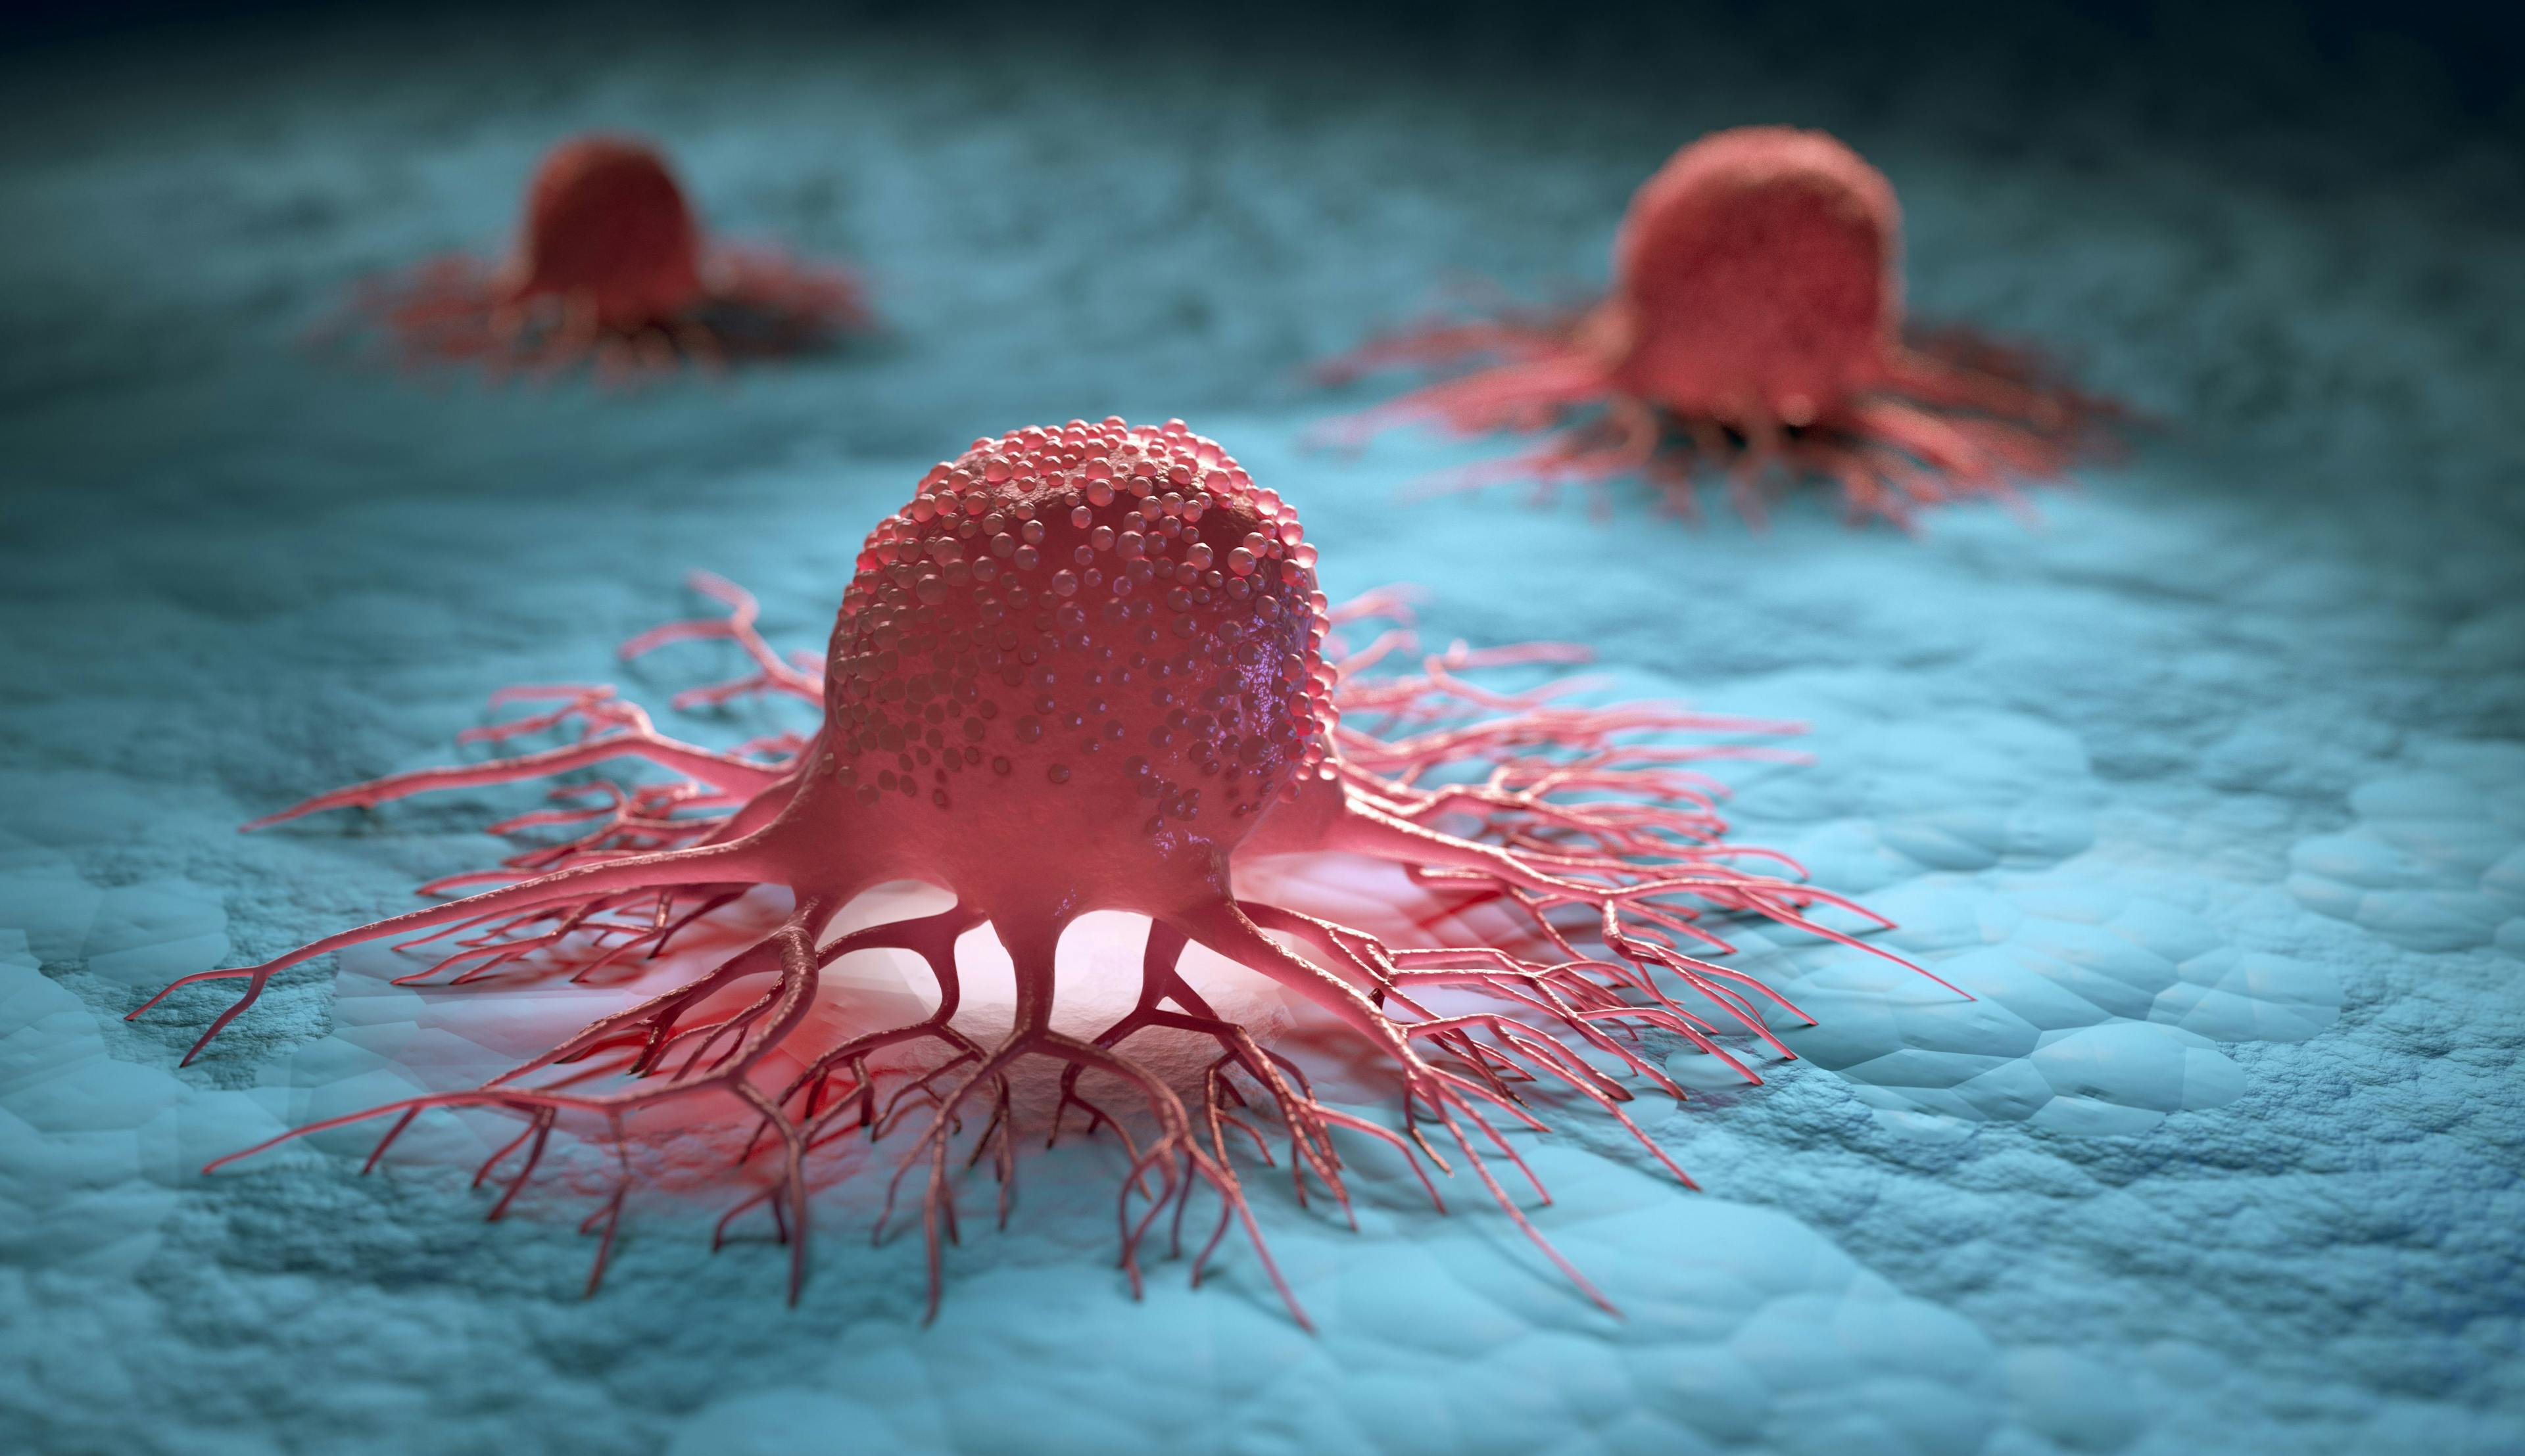 Gilead’s Trodelvy Meets Primary Endpoint for Late-Line HR+/HER2- Metastatic Breast Cancer